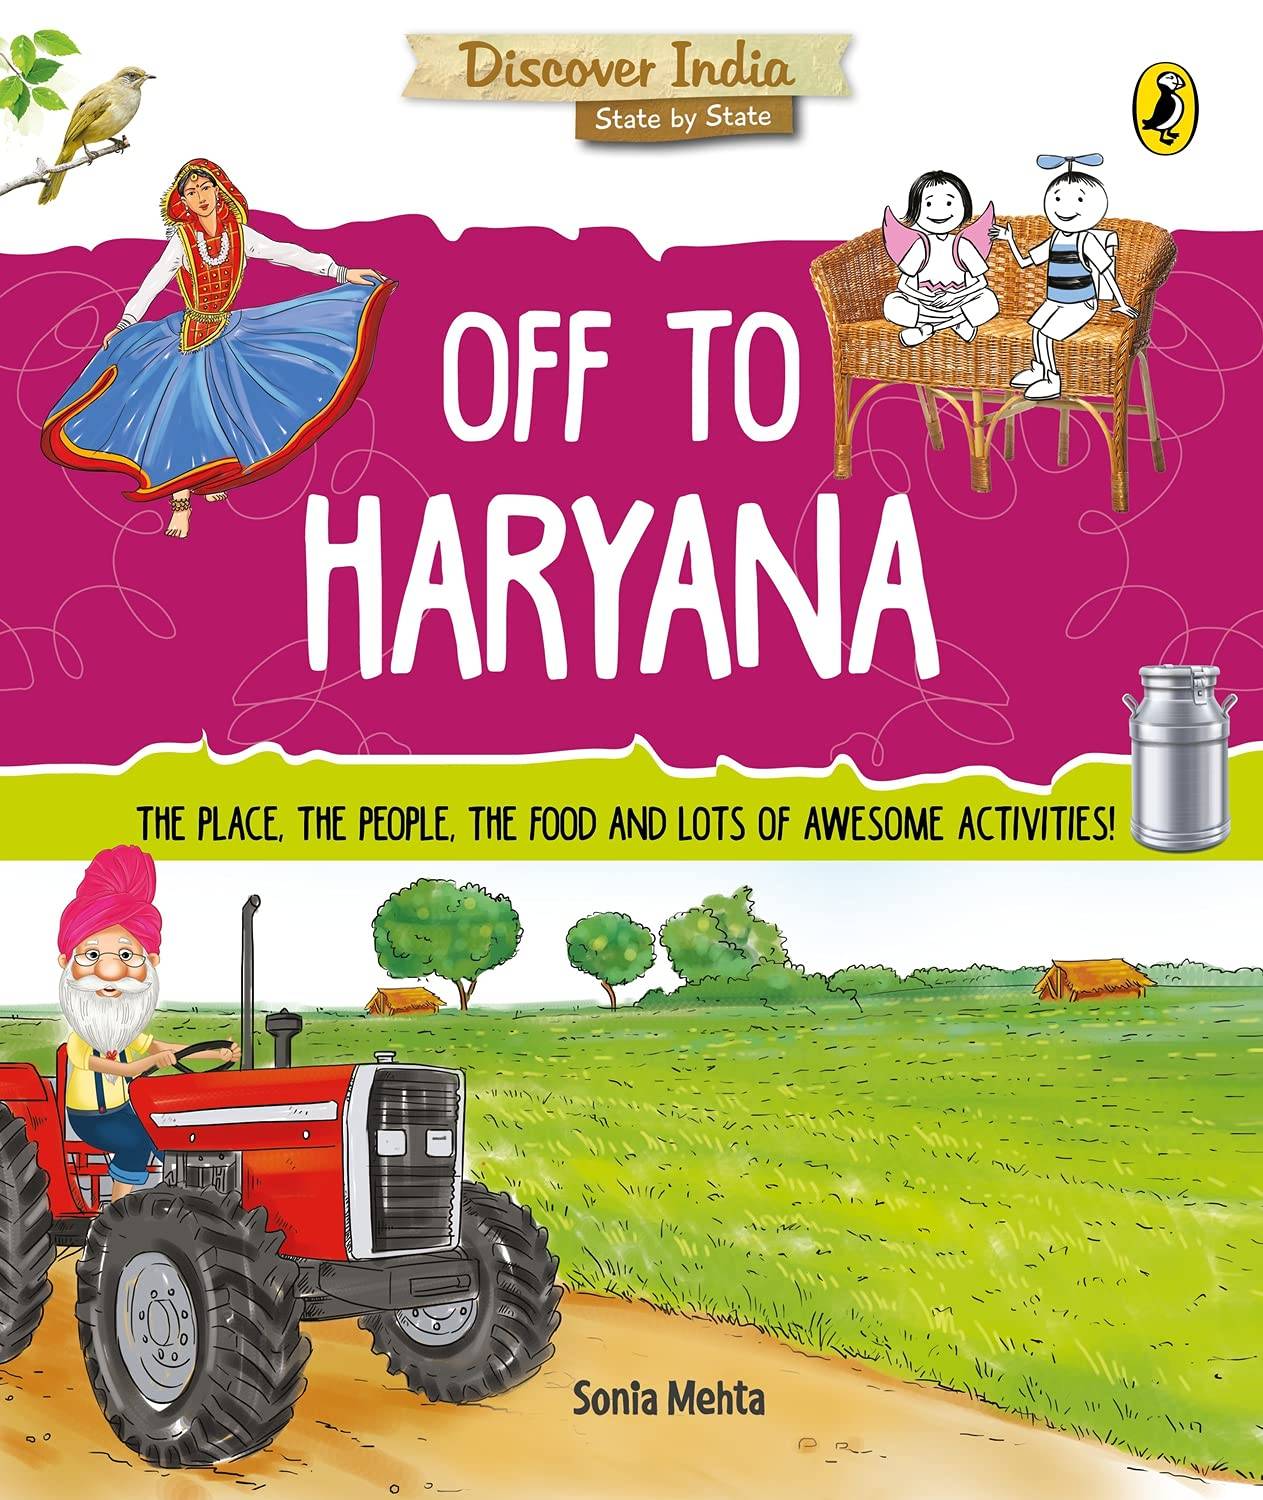 IMG : Discover India- Off to Haryana